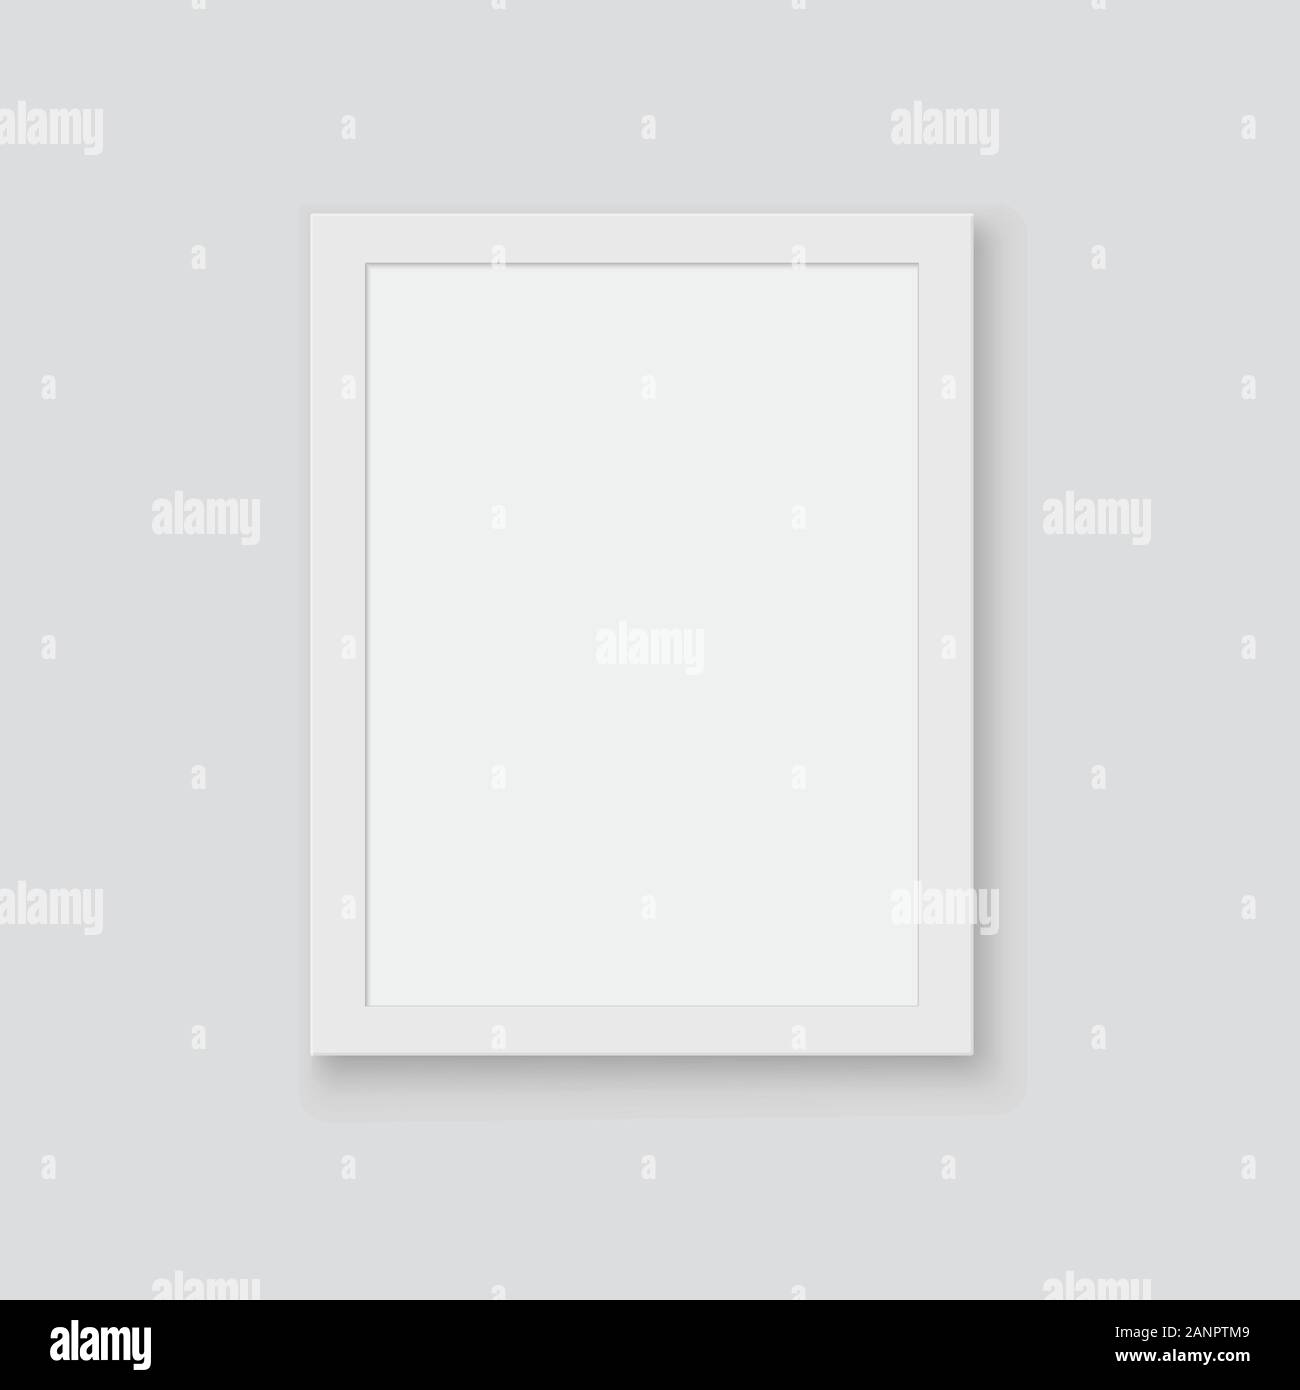 Detailed realistic design template poster. Empty white A4 sized paper mockup hanging with clips. Vector illustration. Stock Vector